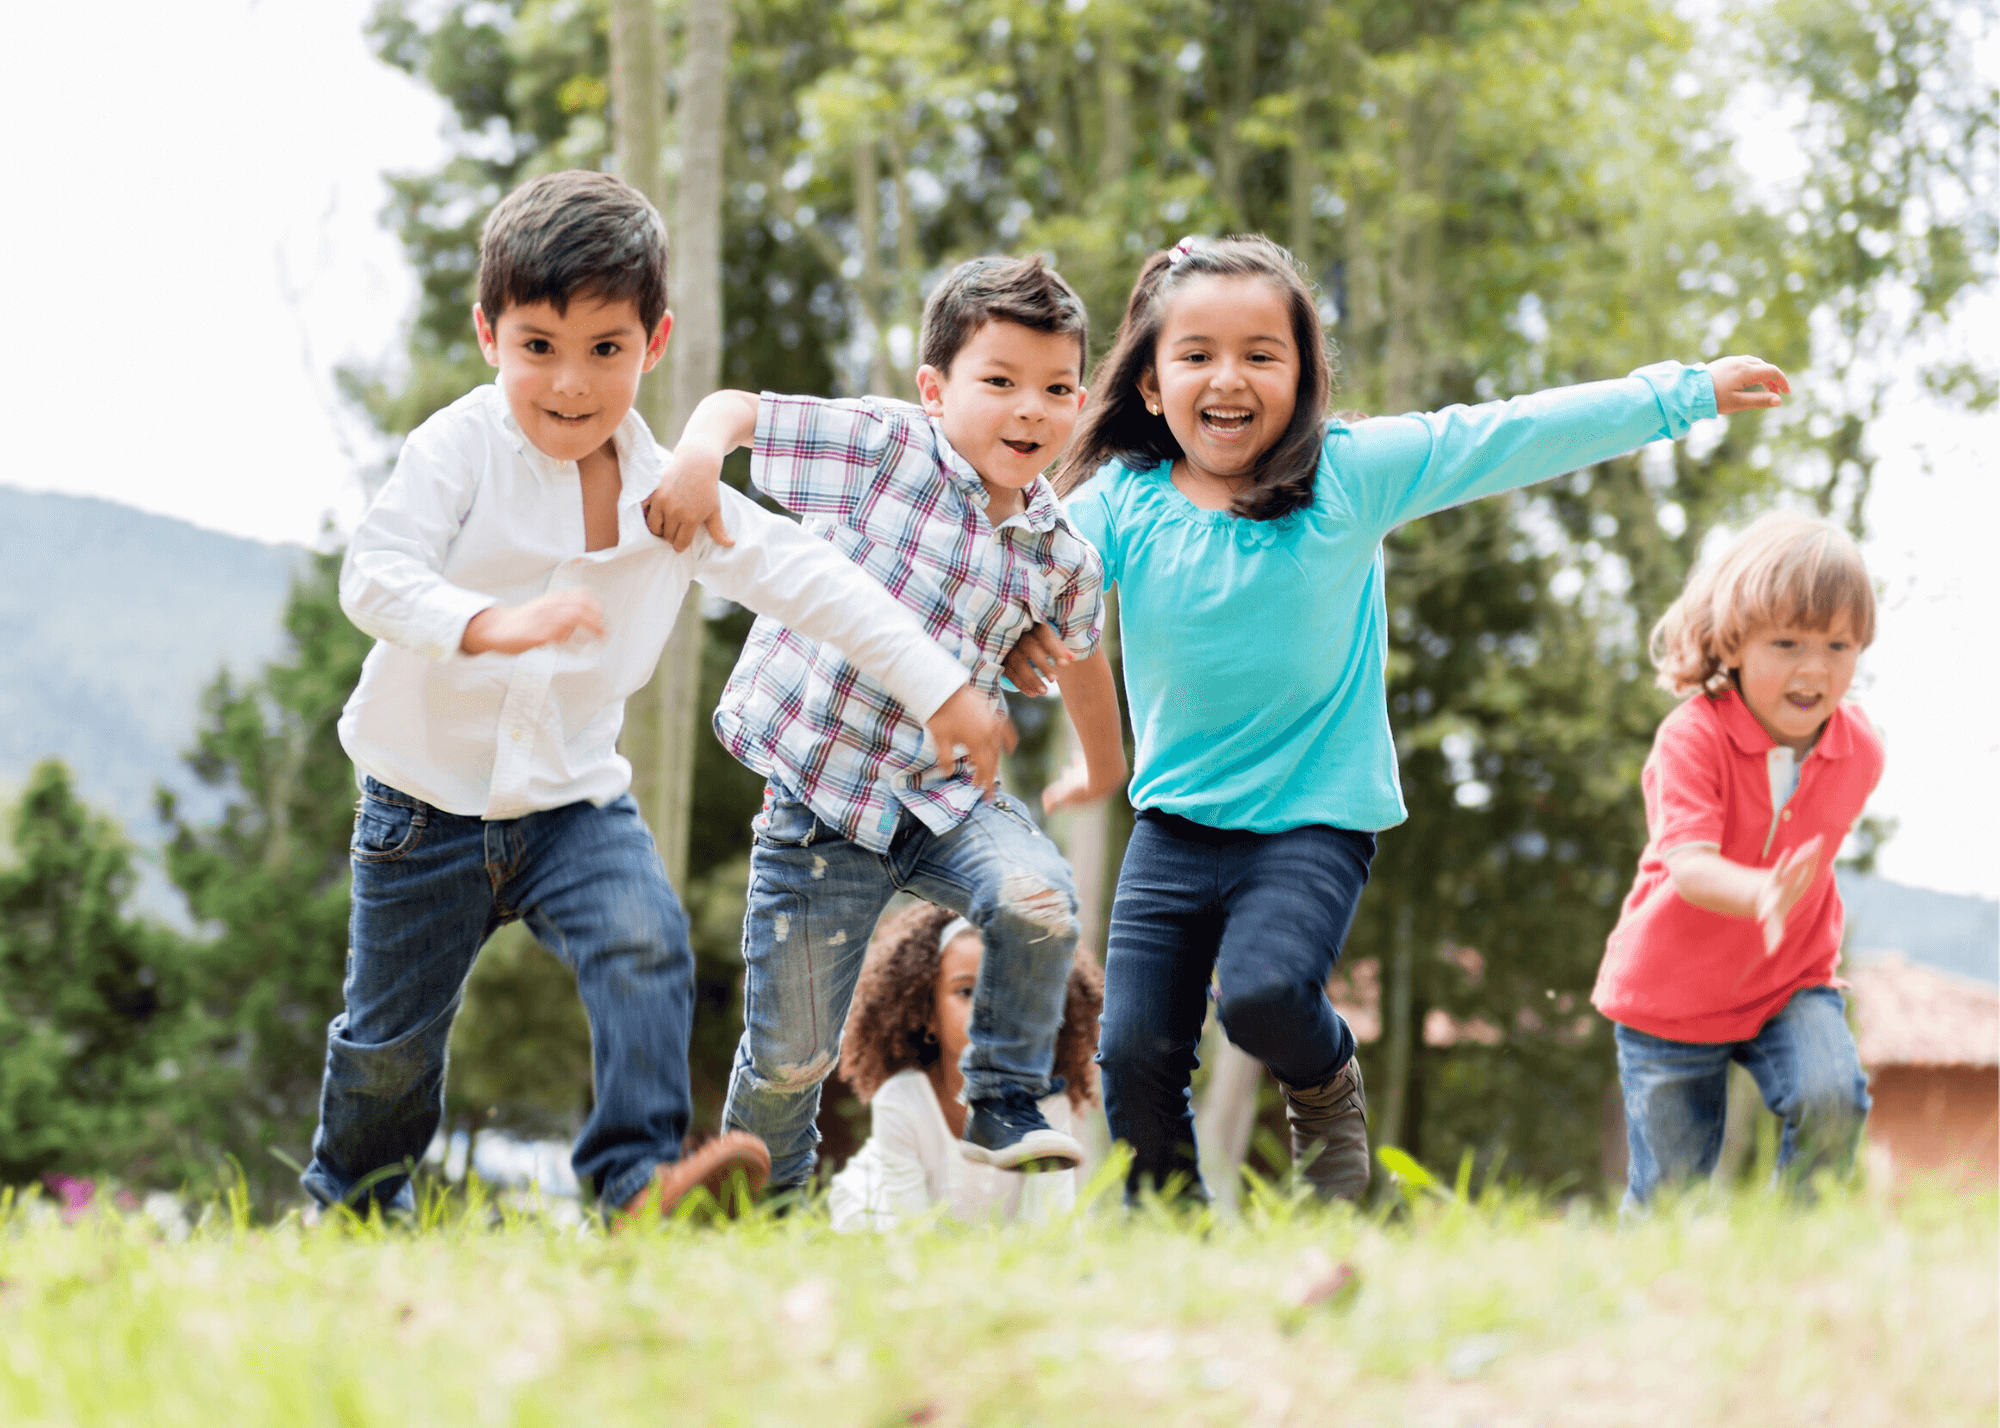 11 Different Types of Play for Growing Children